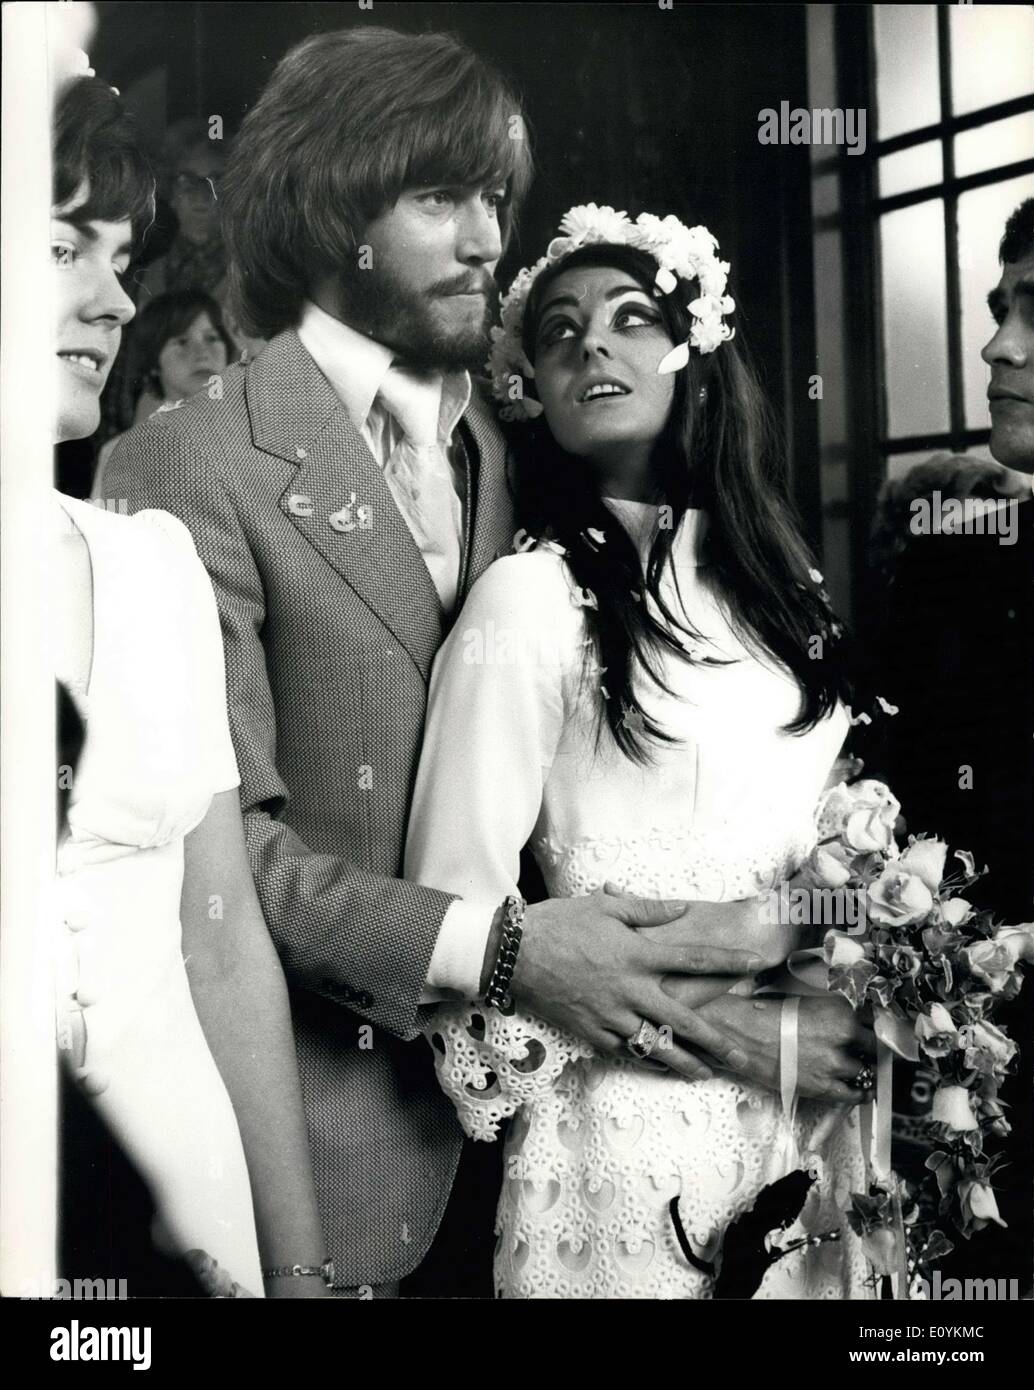 Sep. 01, 1970 - Bee Gee Barry Gibb Weds. Bee Gees lead singer and founder Barry Gibb was married at Caxton Hall today - his birthday - to 20-year-old Linda Gray, a former ''Miss Edinburgh''. Barry founded the group with his two brothers Robin and Maurice. They broke up last December and announced just over a week ago that they were reforming. Barry's previous marriage was dissolved last year. photo shows The happy couple pictured after the ceremony today. Stock Photo